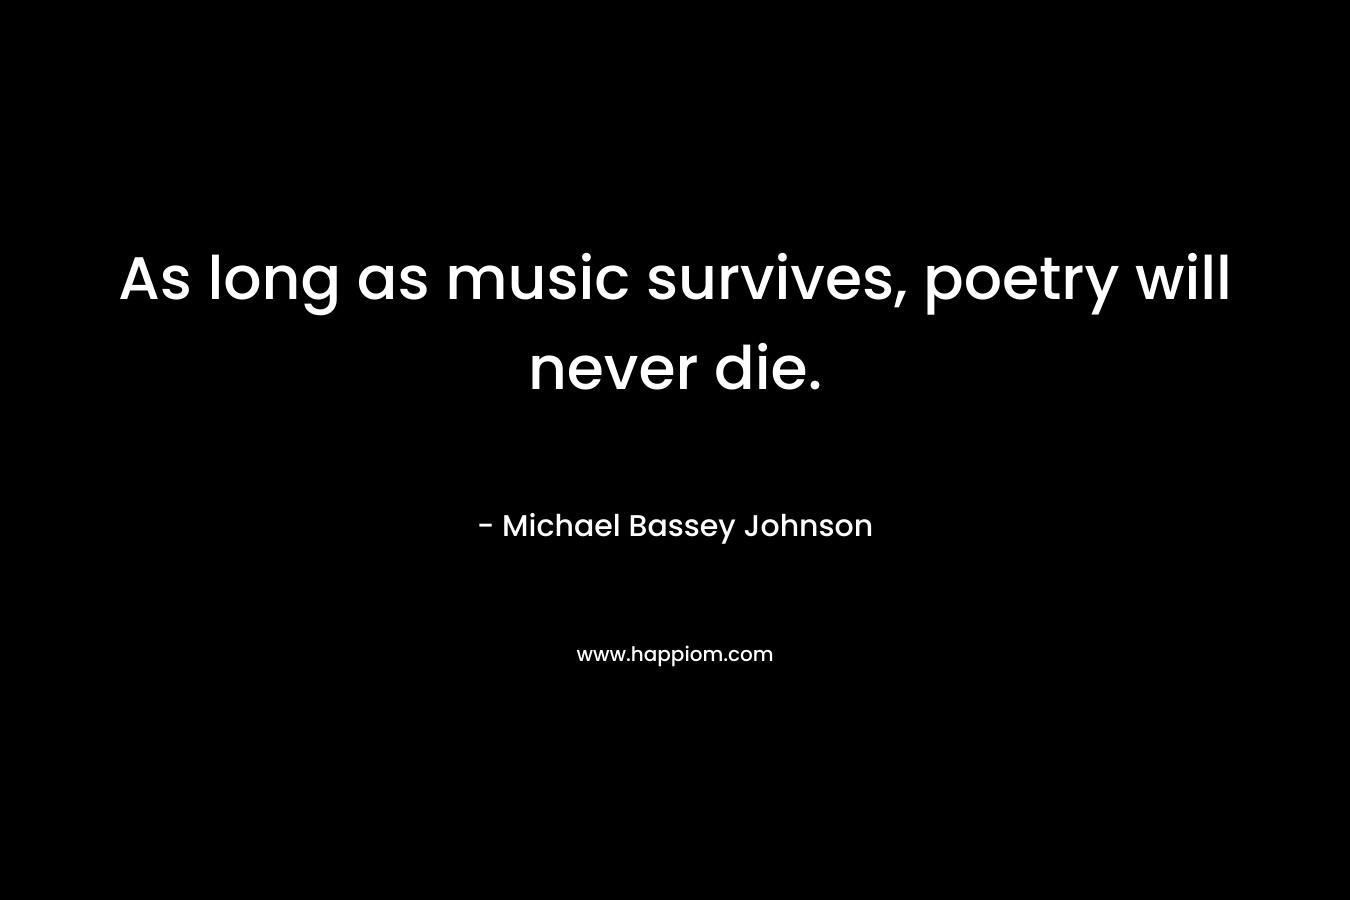 As long as music survives, poetry will never die.